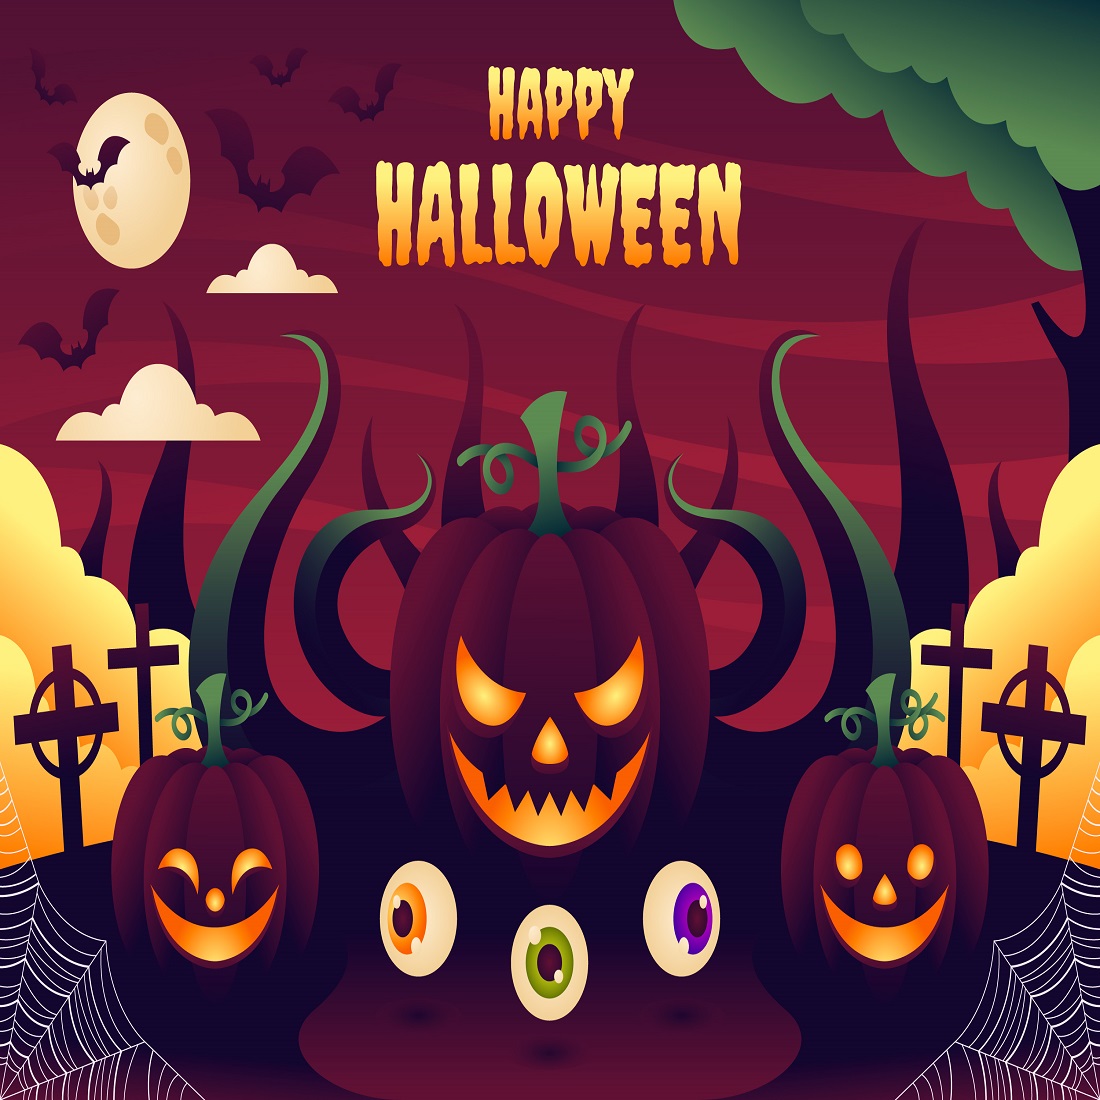 Realistic background Halloween celebration cover image.